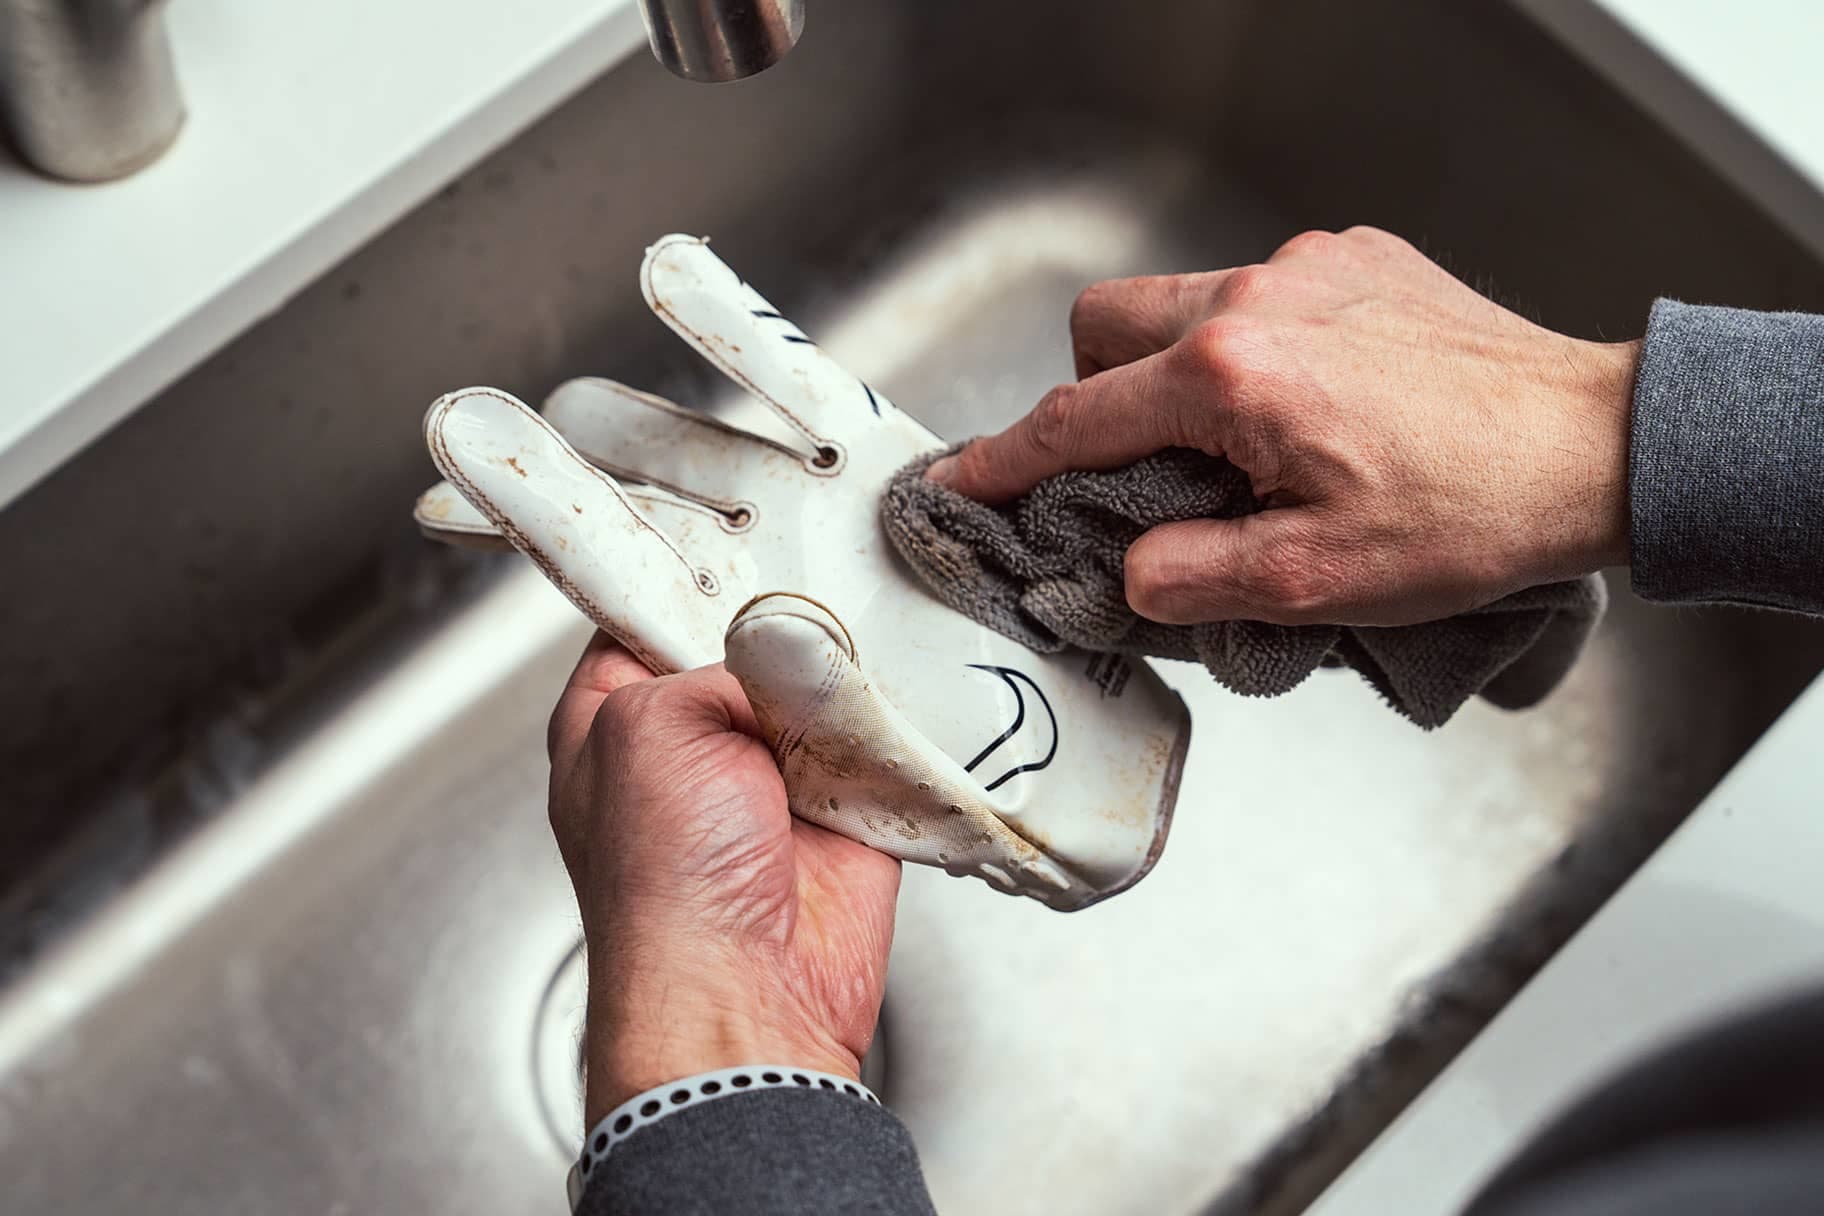 How to Clean Football Gloves.